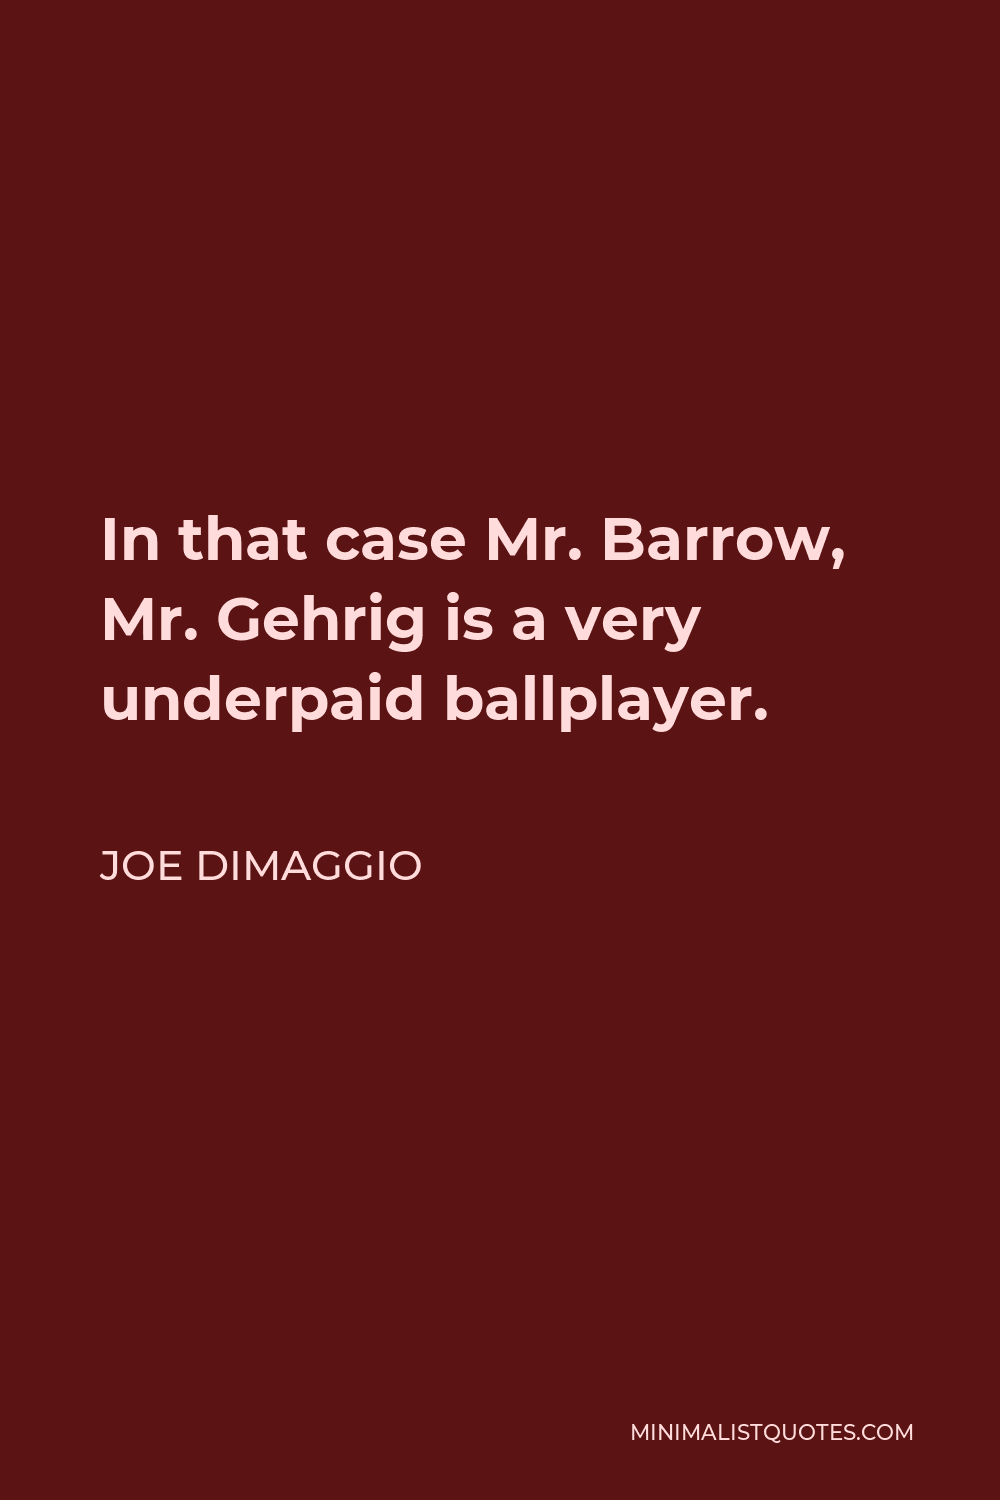 Joe DiMaggio Quote - In that case Mr. Barrow, Mr. Gehrig is a very underpaid ballplayer.